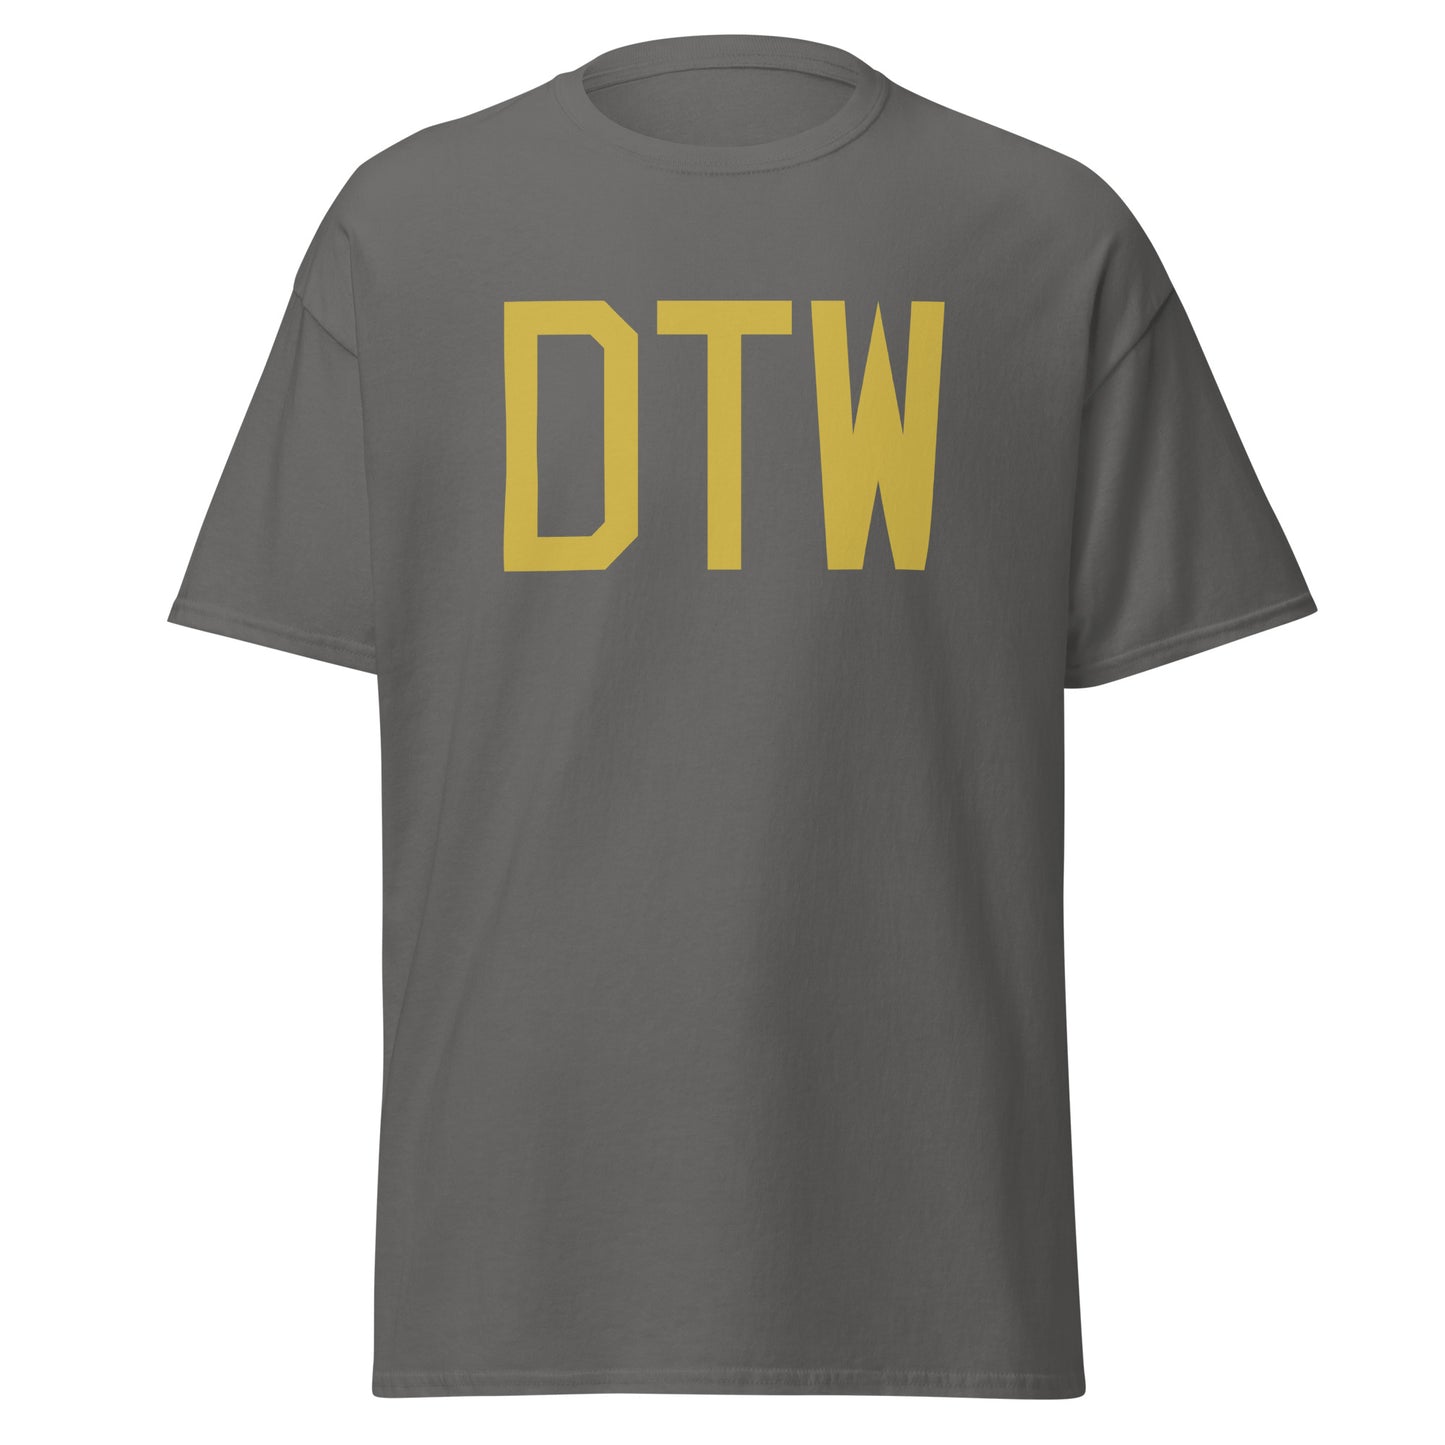 Aviation Enthusiast Men's Tee - Old Gold Graphic • DTW Detroit • YHM Designs - Image 05